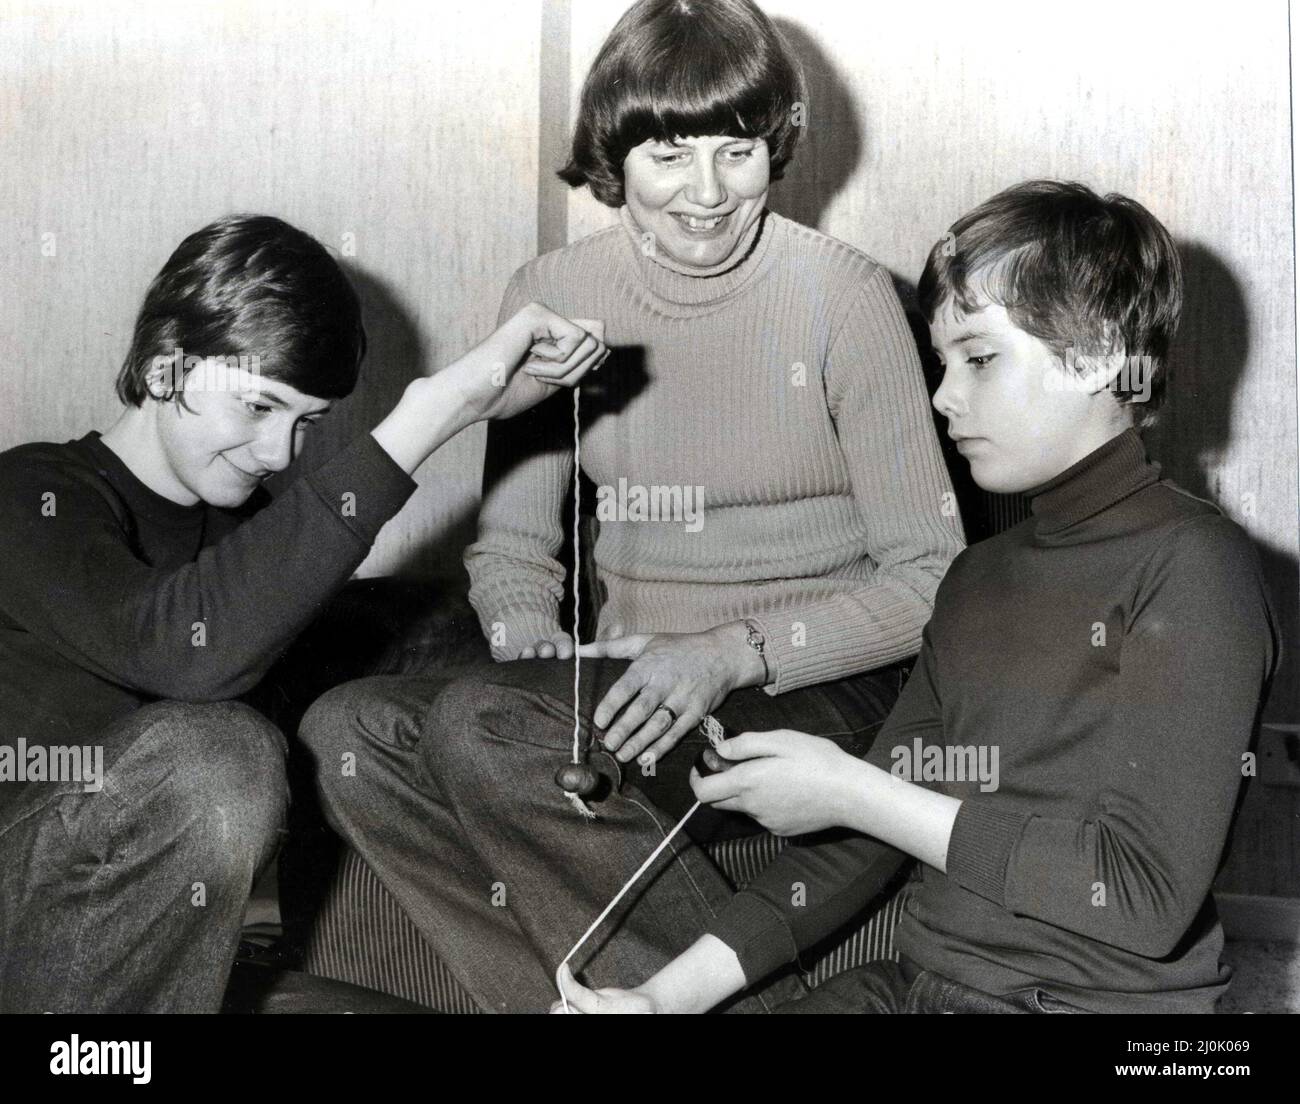 Conkers - Mrs Caryl Roach, of Lakeside, Cardiff, with her conker-playing sons, David (left) and Paul. 29th October 1980. Stock Photo